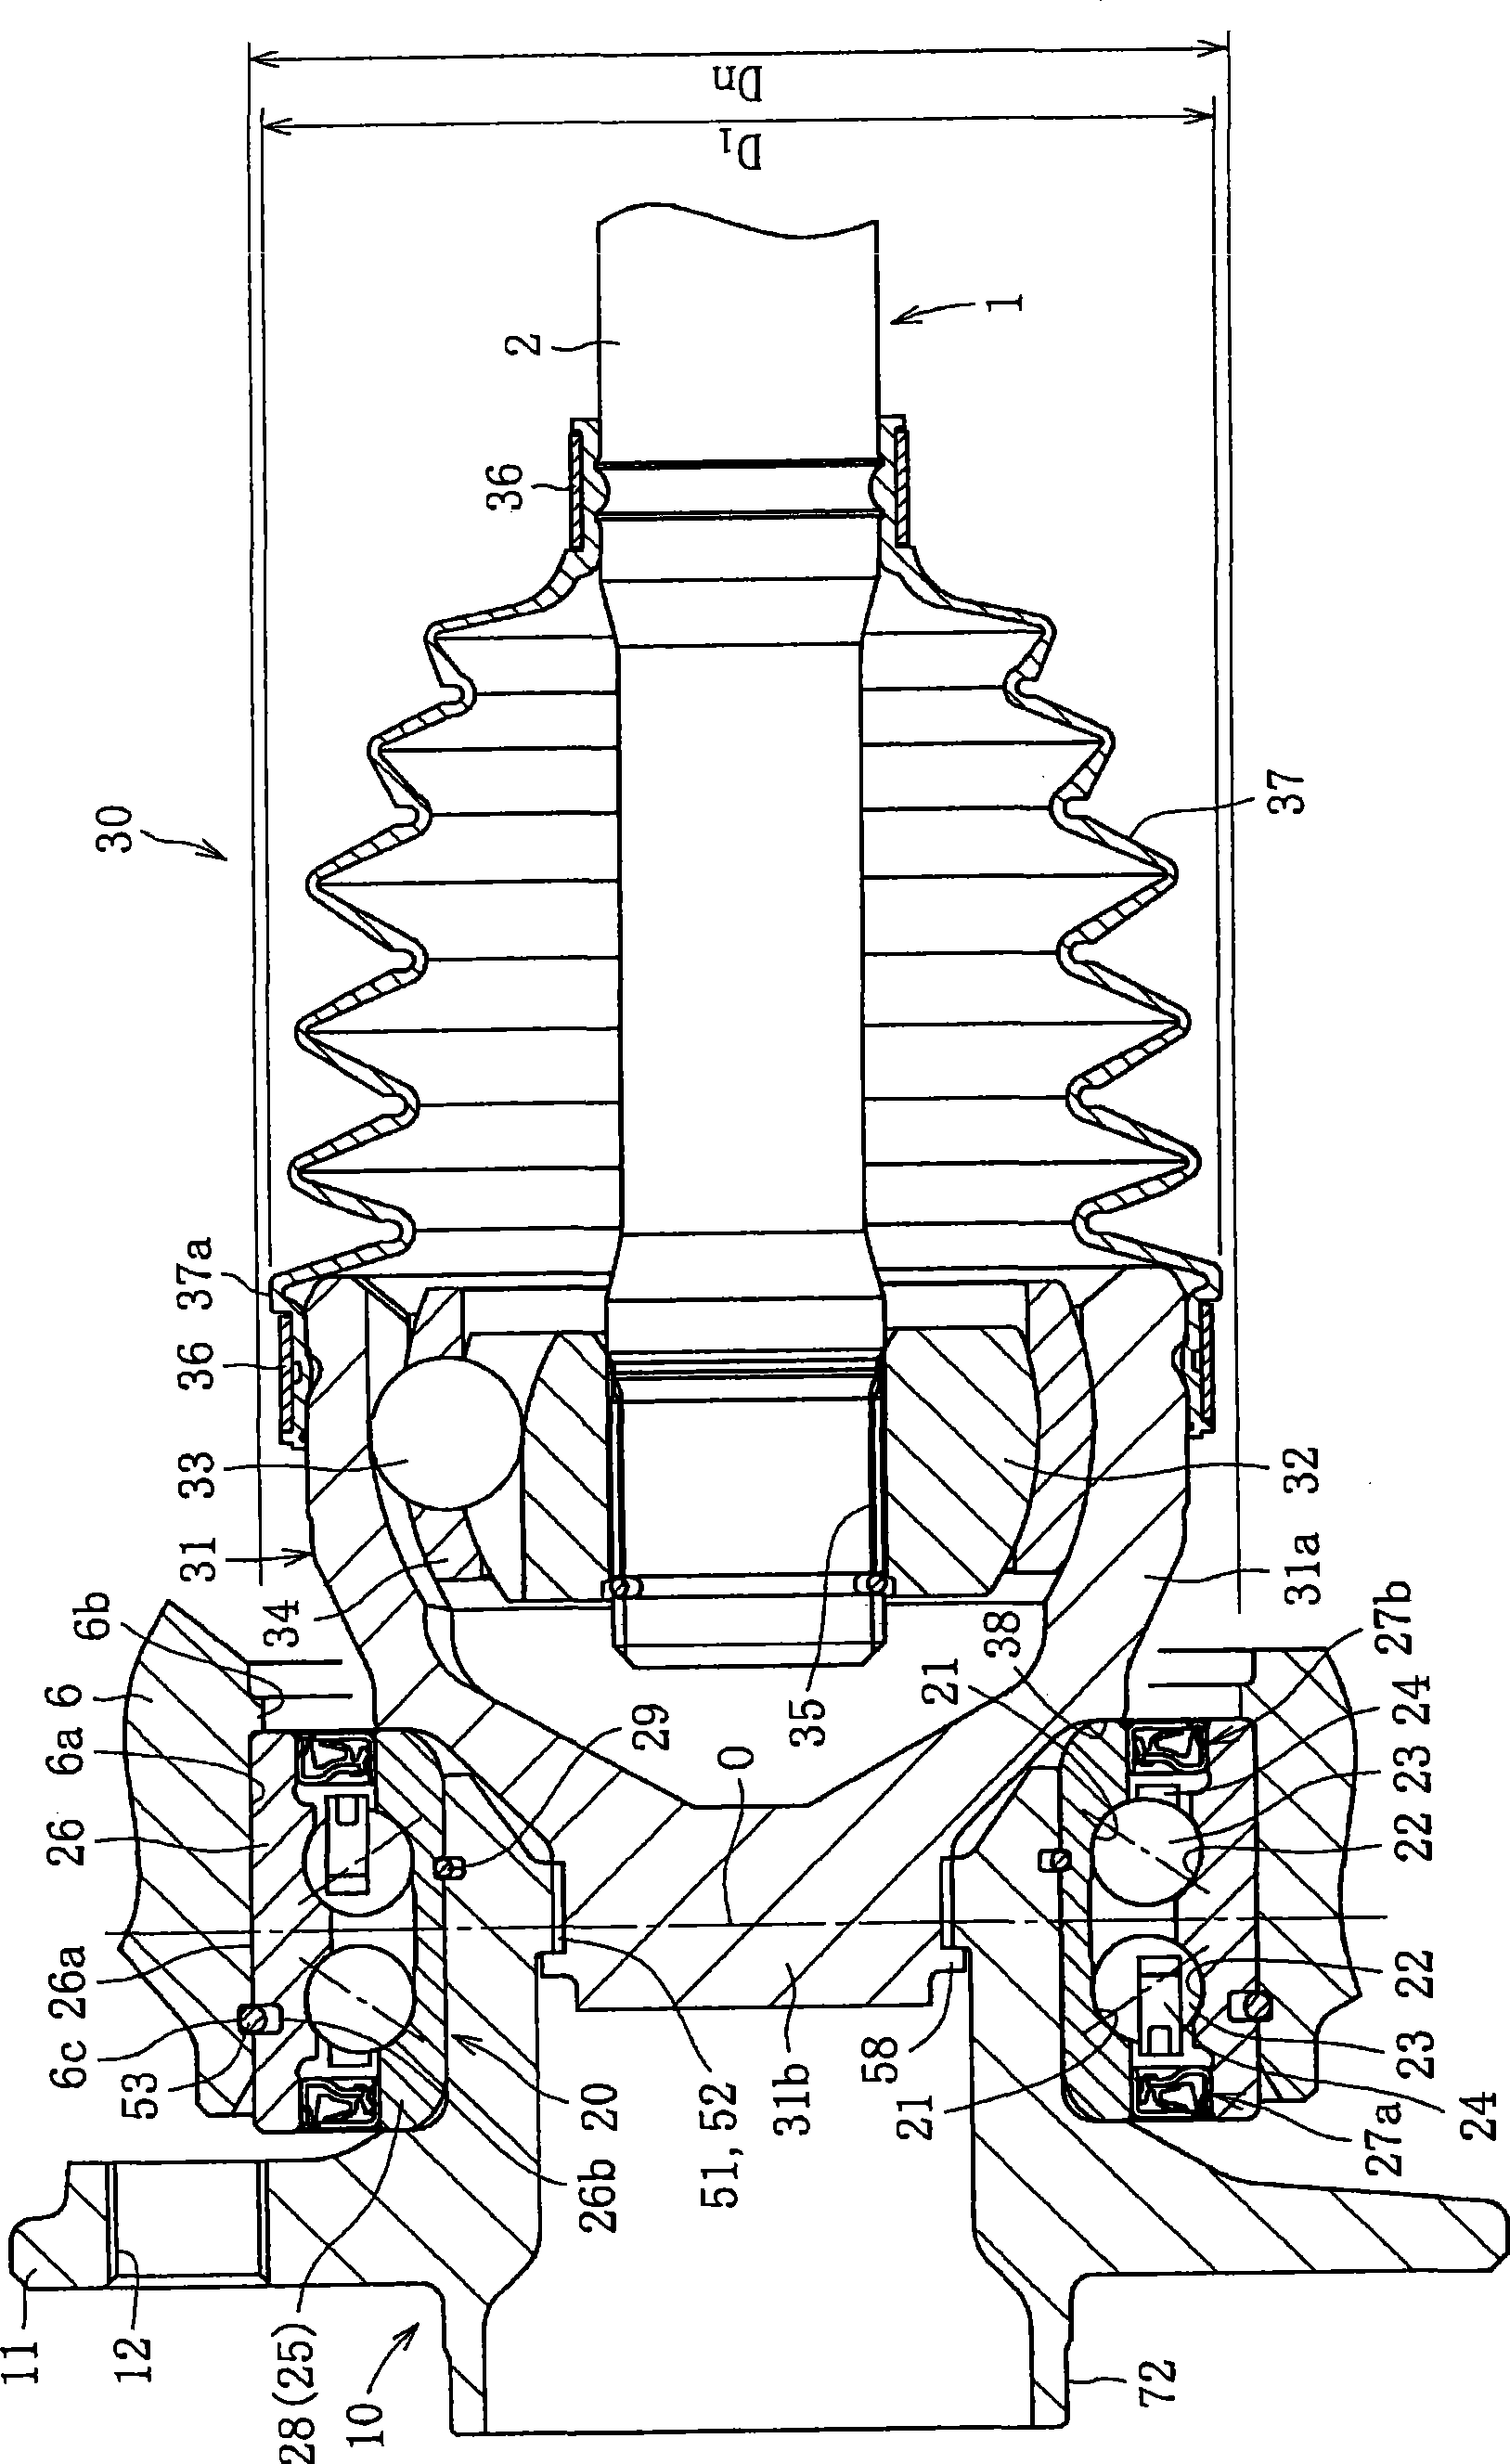 Bearing unit for driving wheels